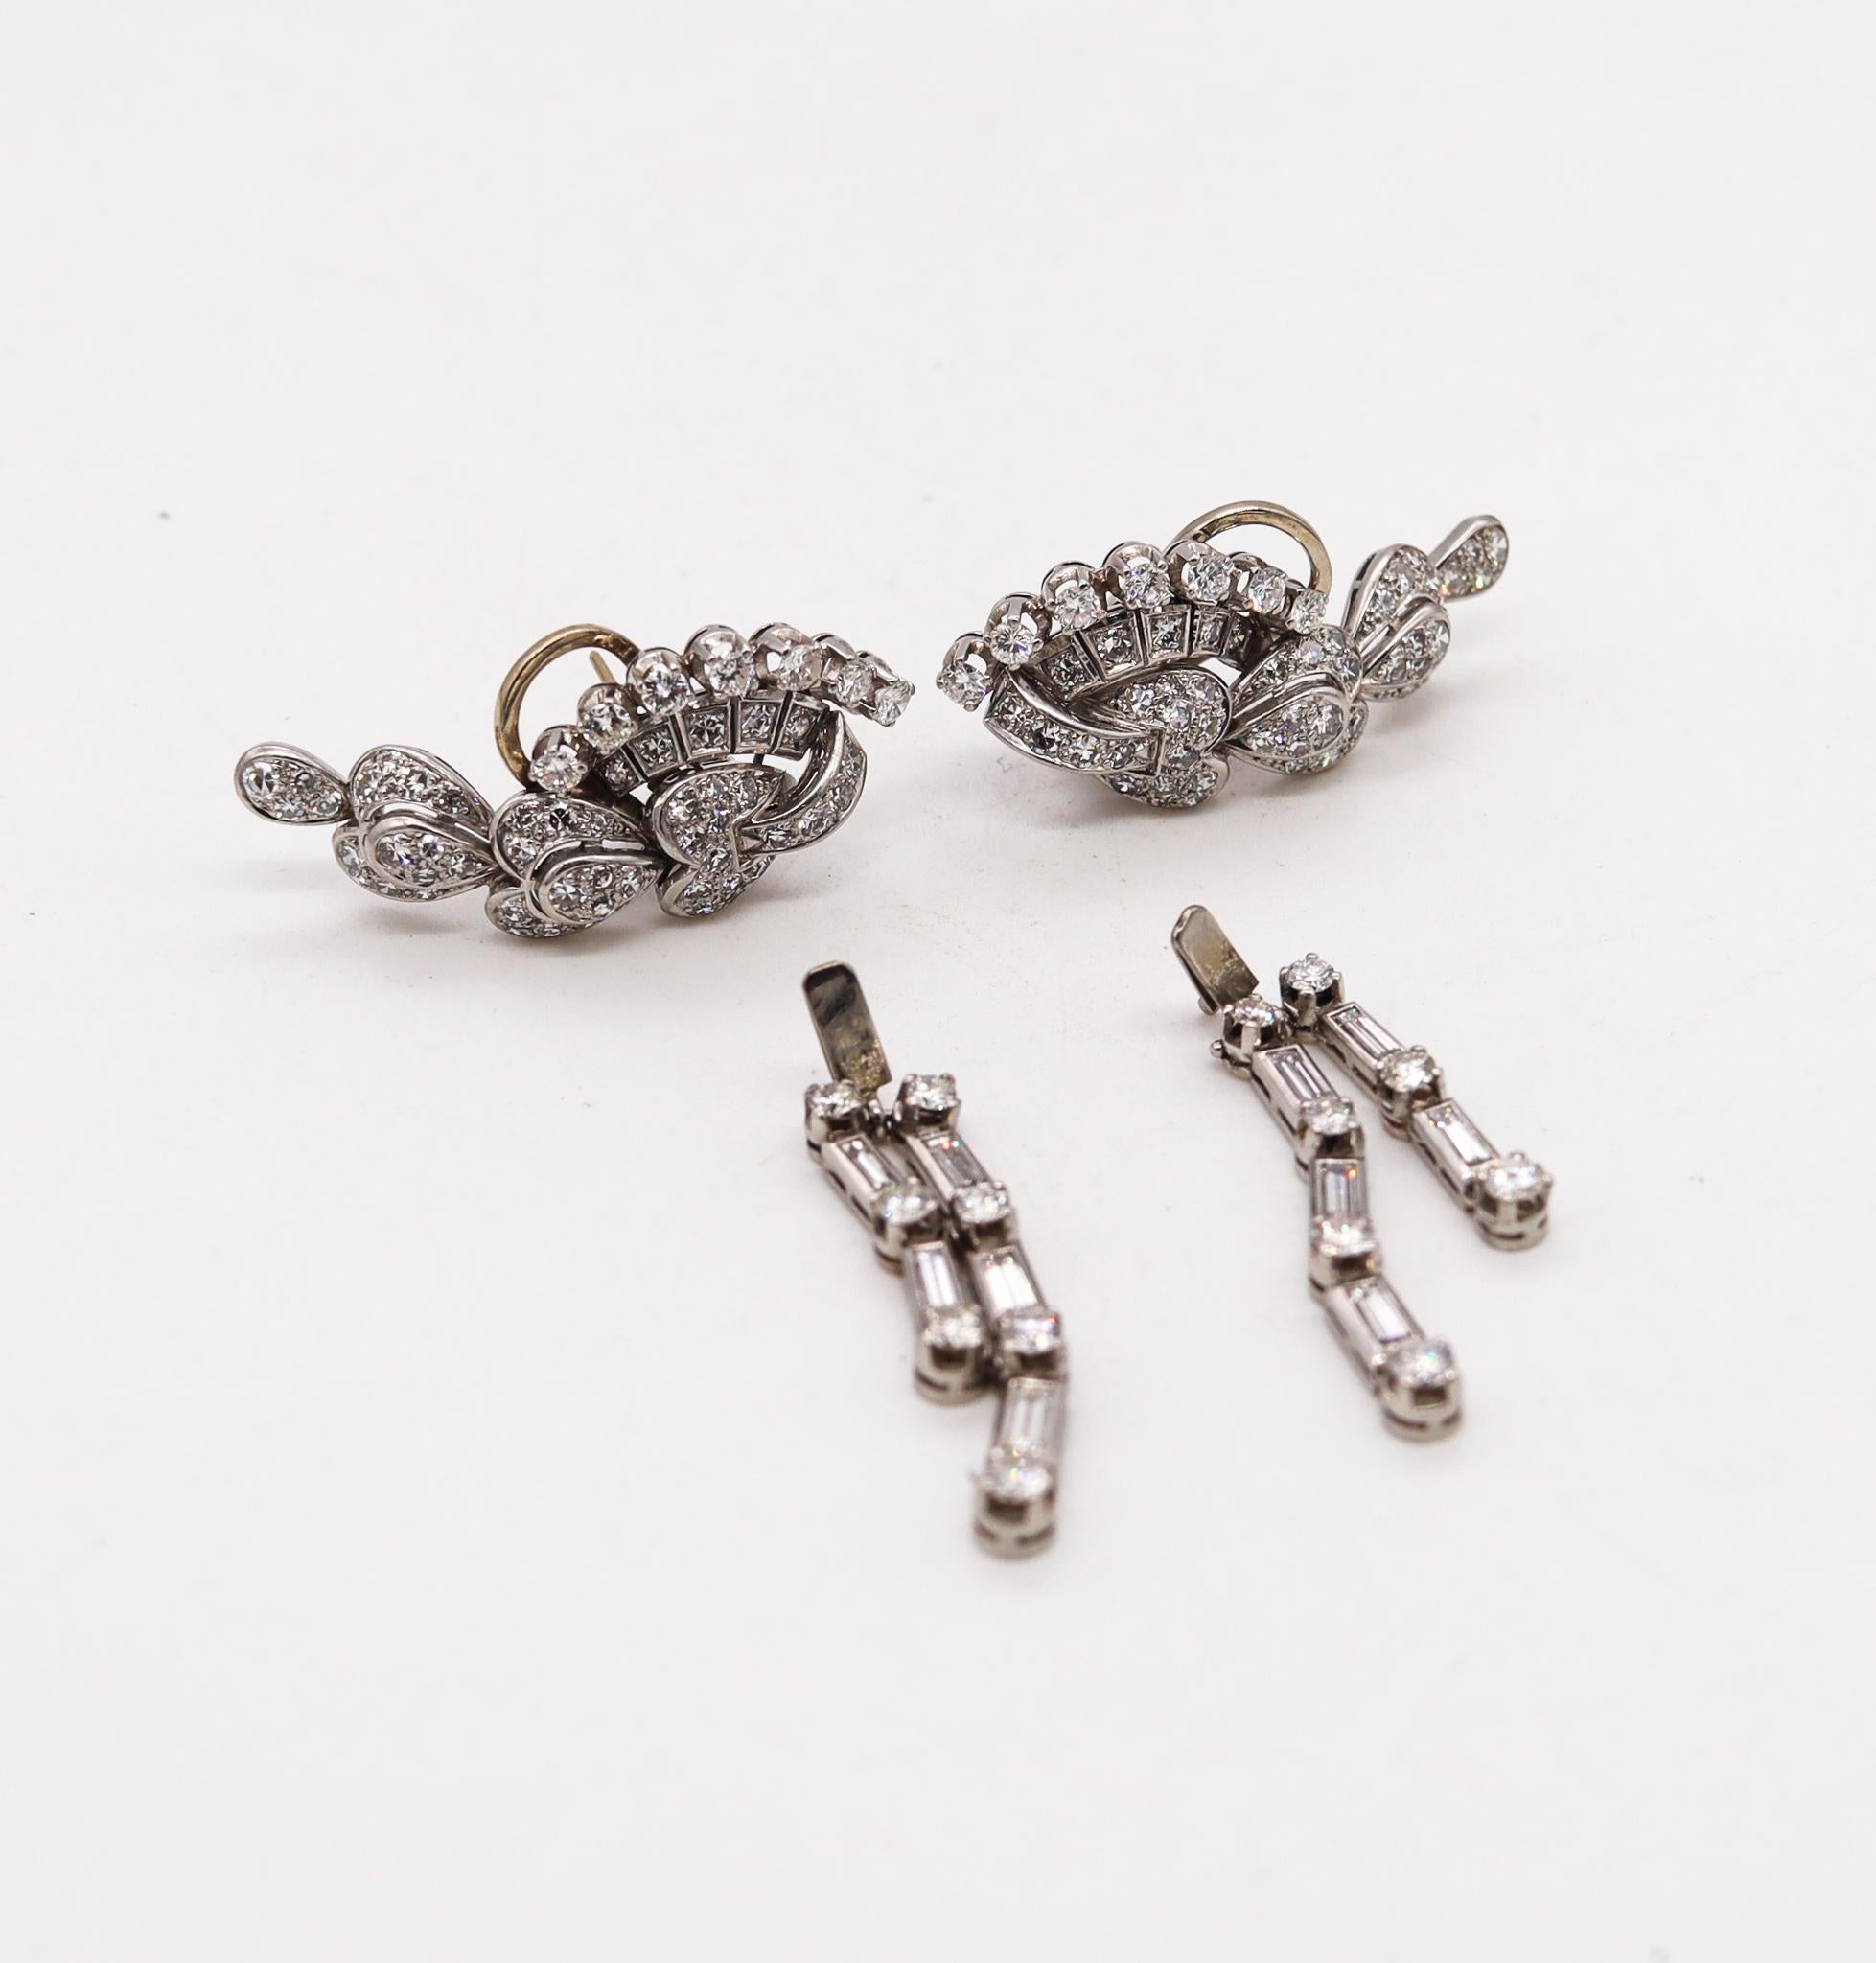 Art Deco convertible clips-earrings

Beautiful elegant day and night pieces, created during the American Art-deco period, circa 1930's. These convertible dismountable pair of clips earrings were carefully crafted and assembled in solid .900/.999